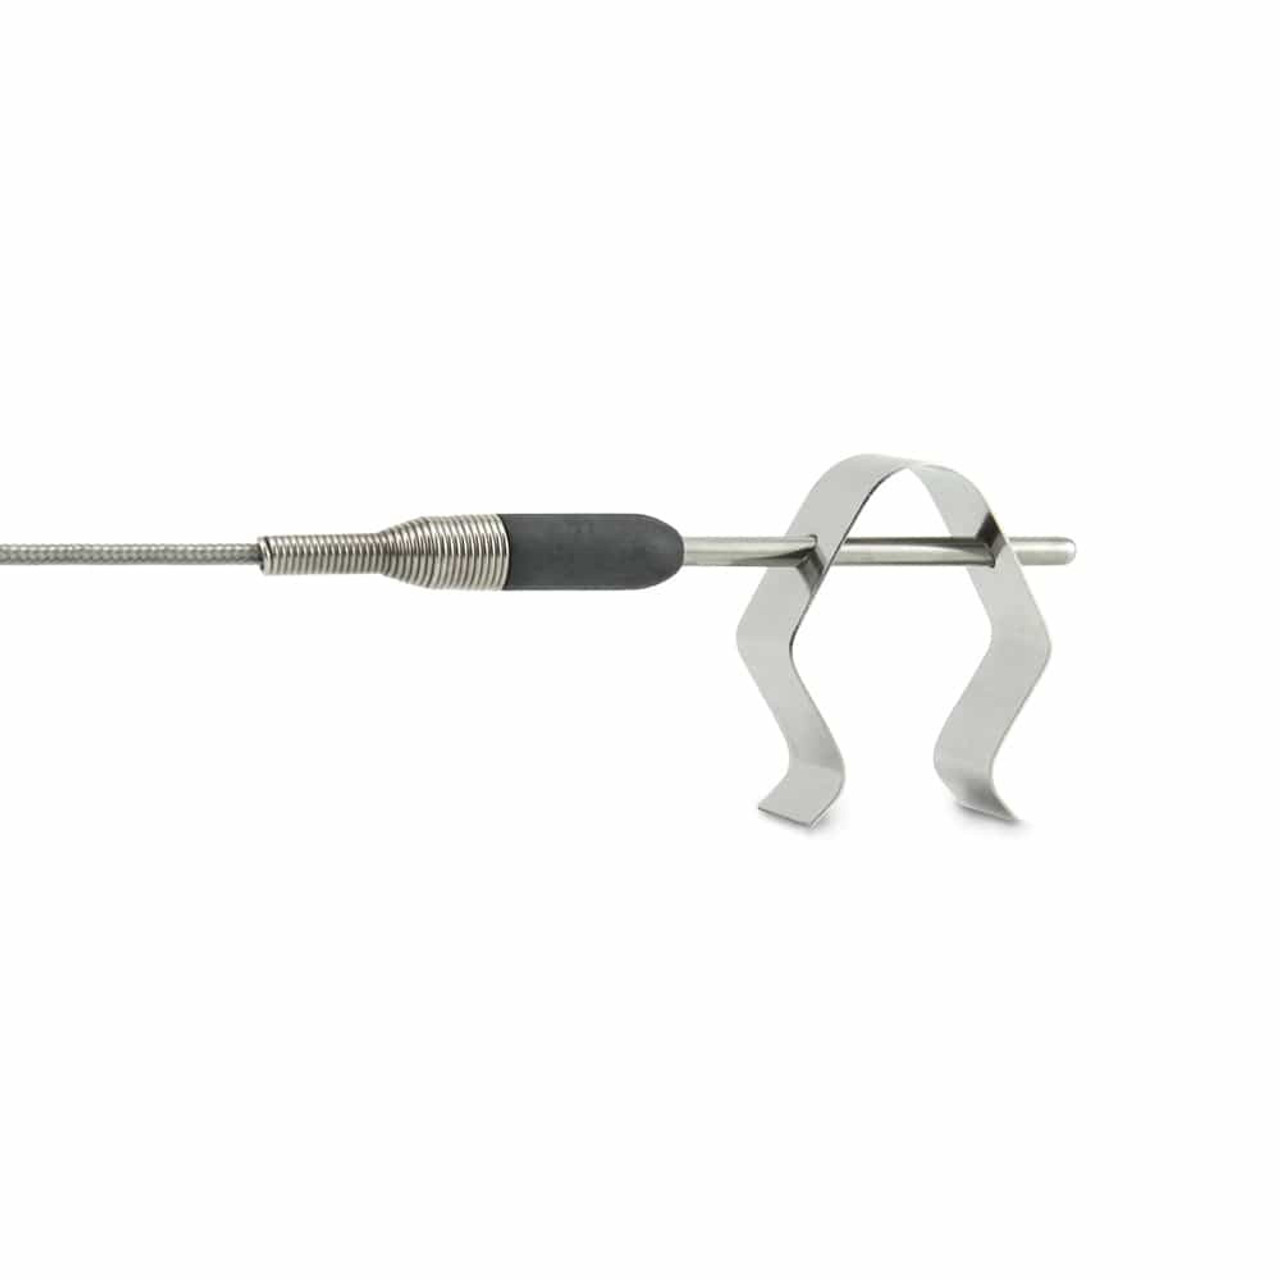 ThermoWorks- Thermo Pro-Series Hight Temp Probe – The Happy Cook